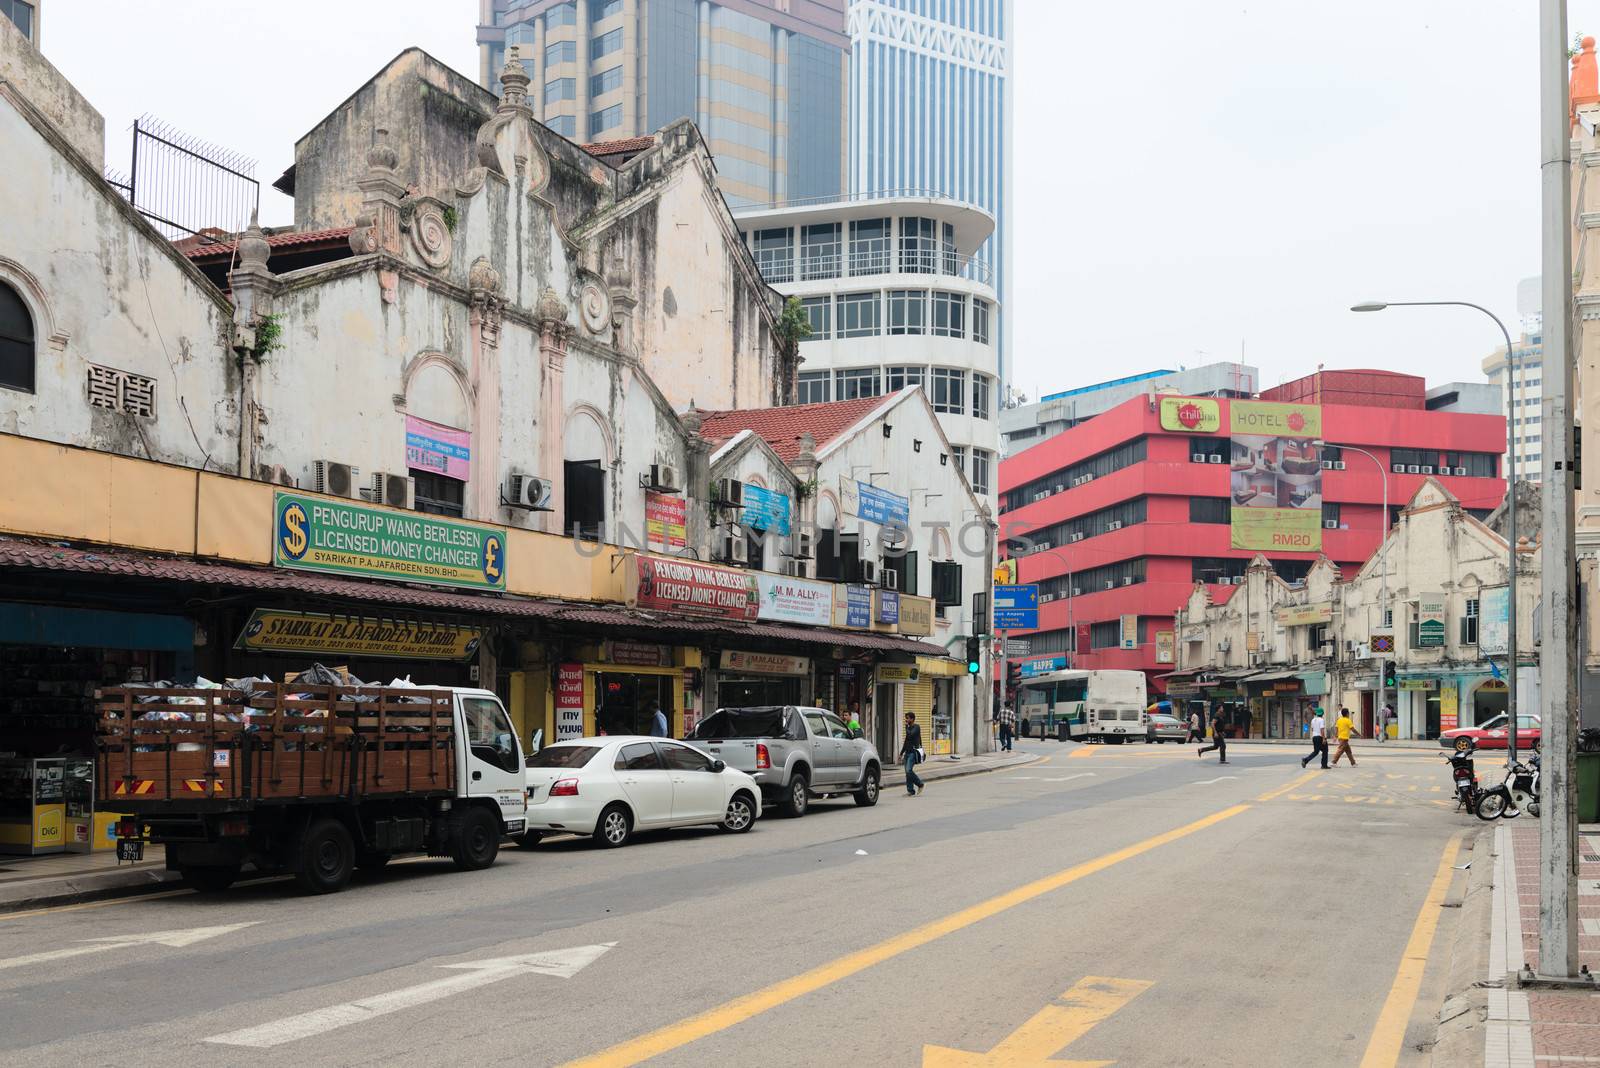 KUALA LUMPUR - JUN 15: Grecian-Spanish style buildings on Little India street on Jun 15, 2013 in Kuala Lumpur, Malaysia. Chinatown is home to much of the city���s budget accommodation.